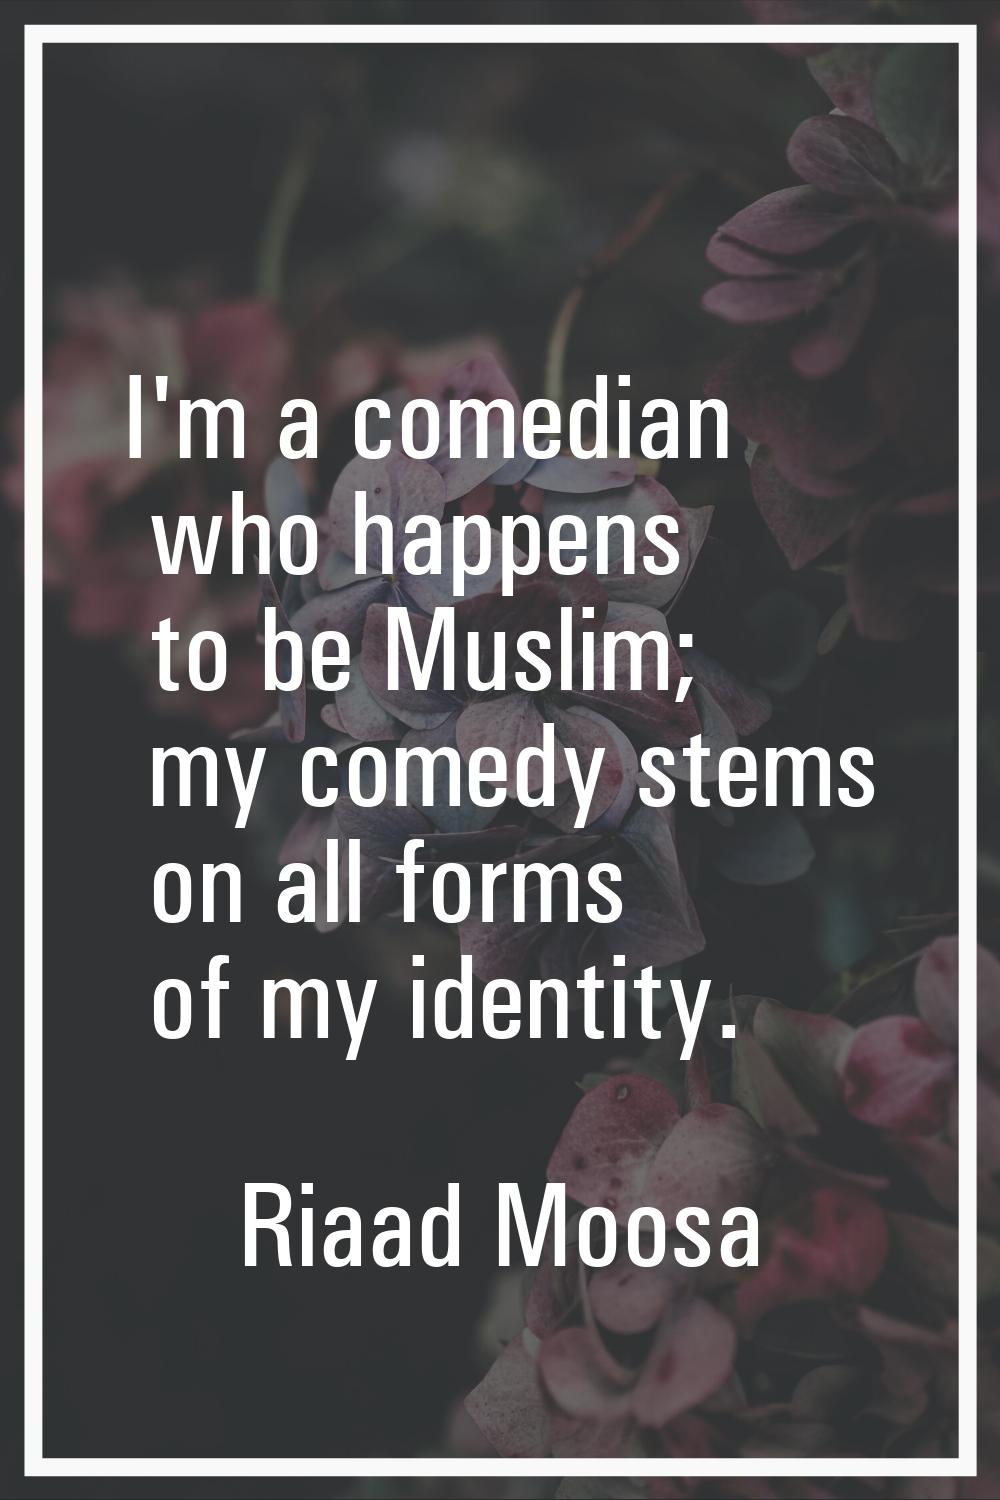 I'm a comedian who happens to be Muslim; my comedy stems on all forms of my identity.